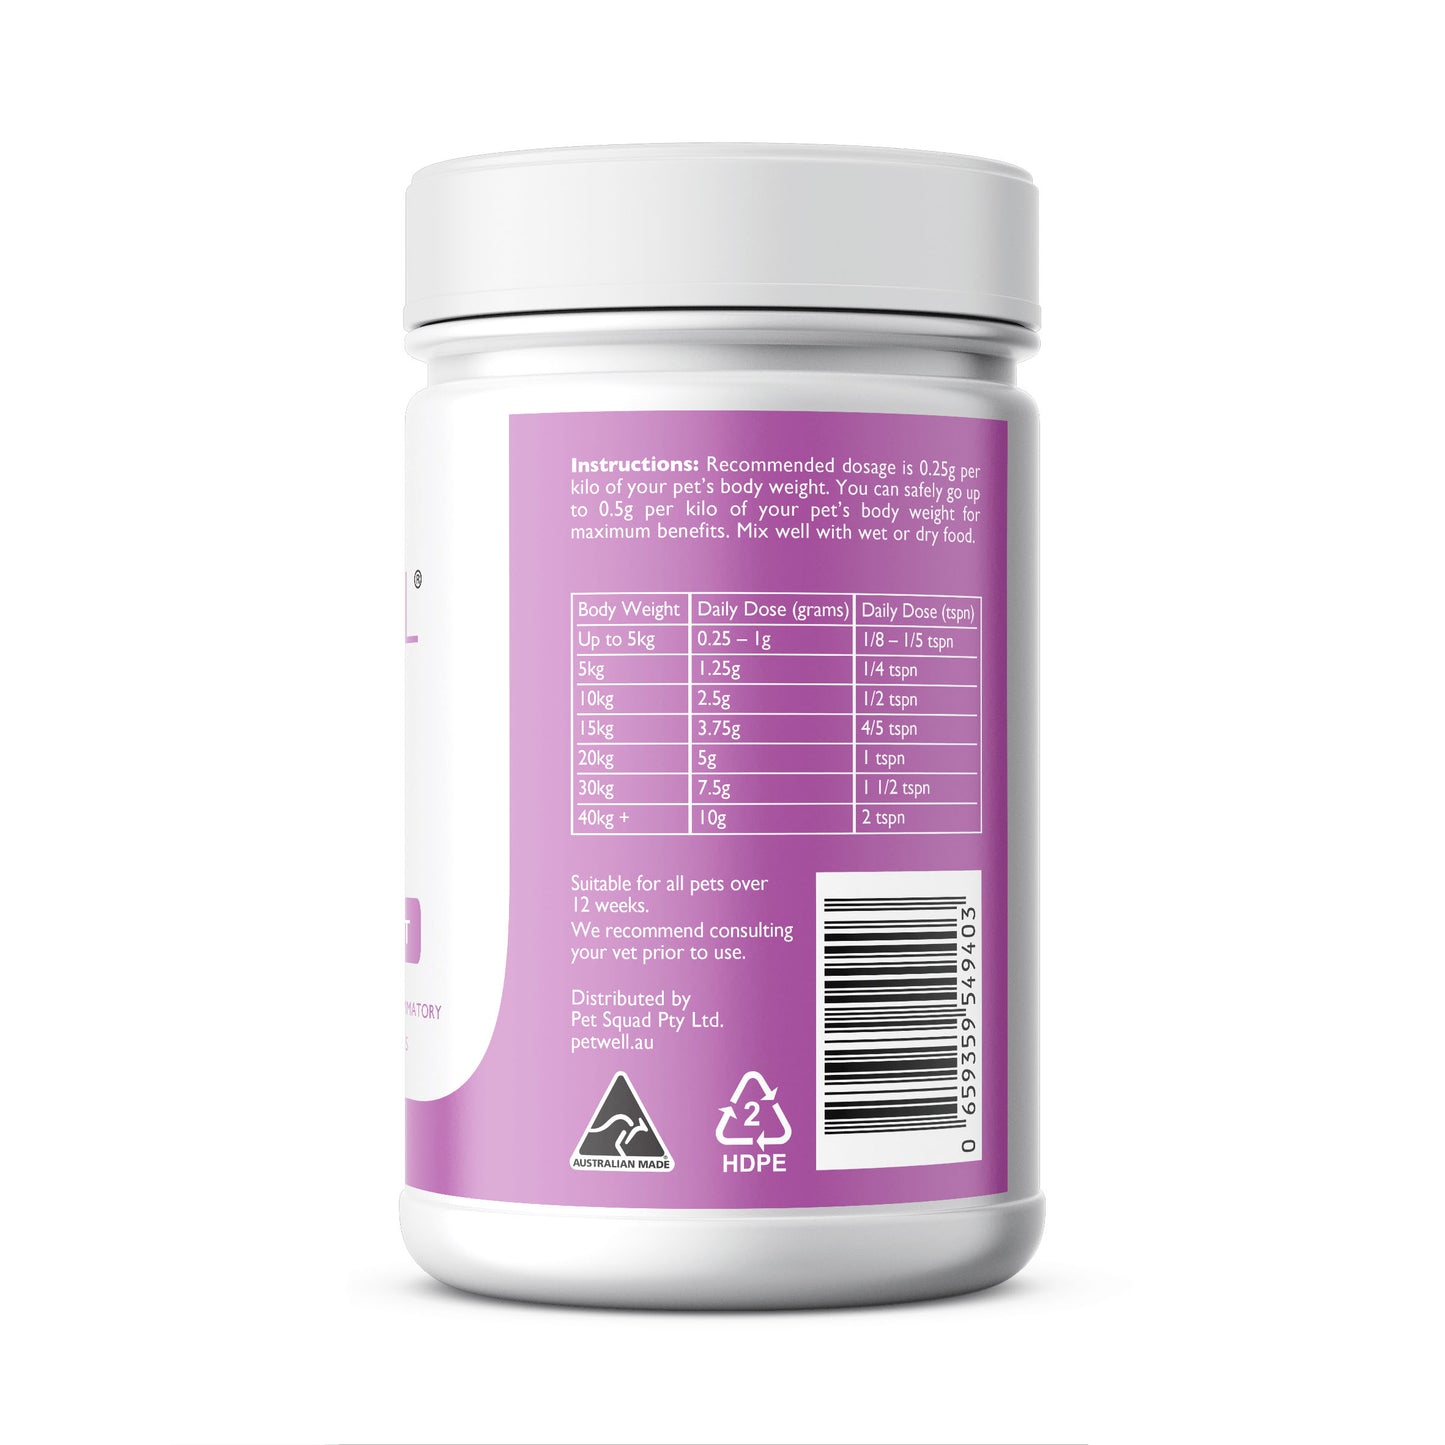 PetWell Thrive - Immune Support